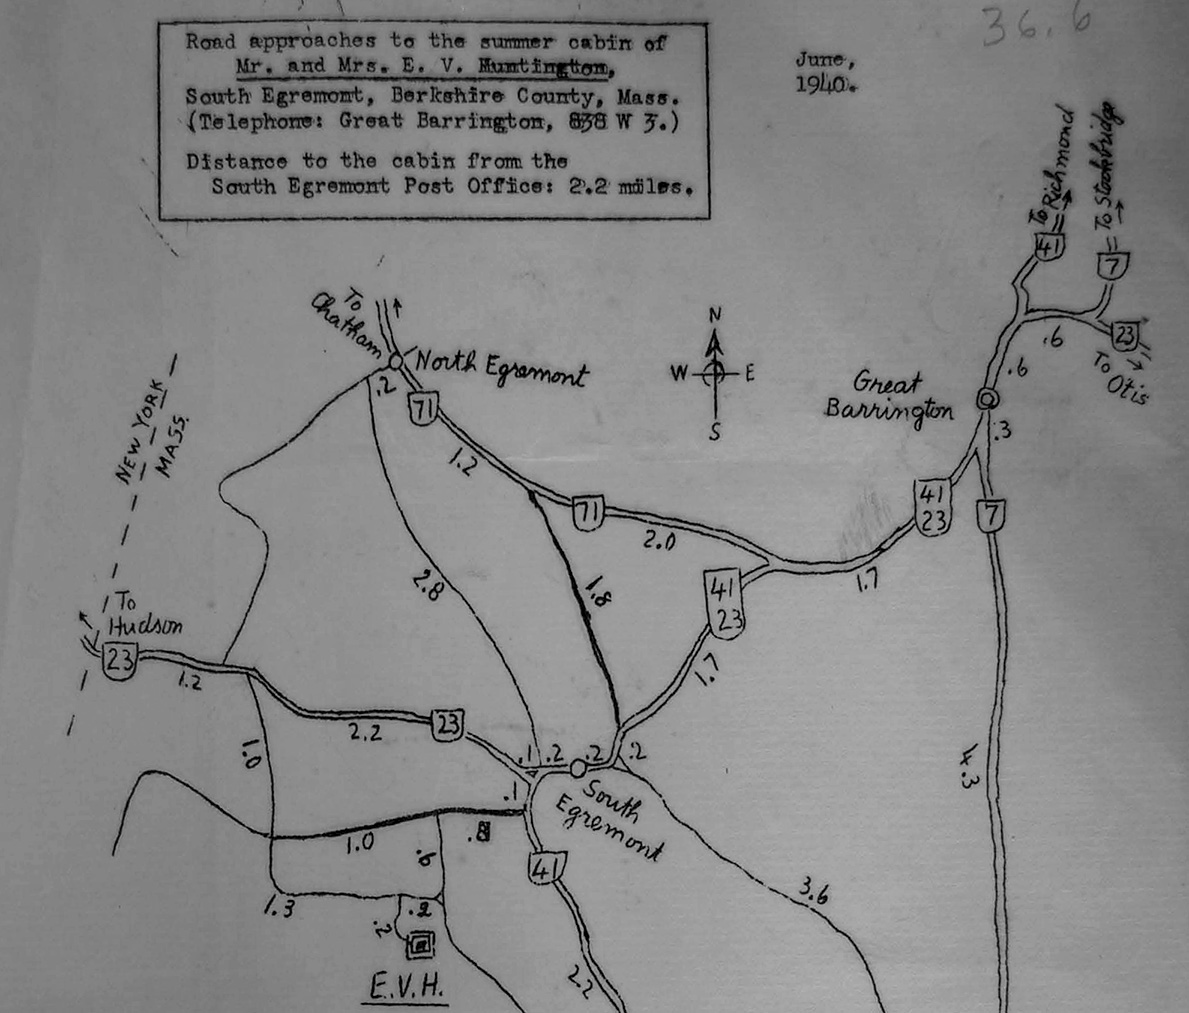 image of mimeographed map to Huntington's cabin in the Berkshires